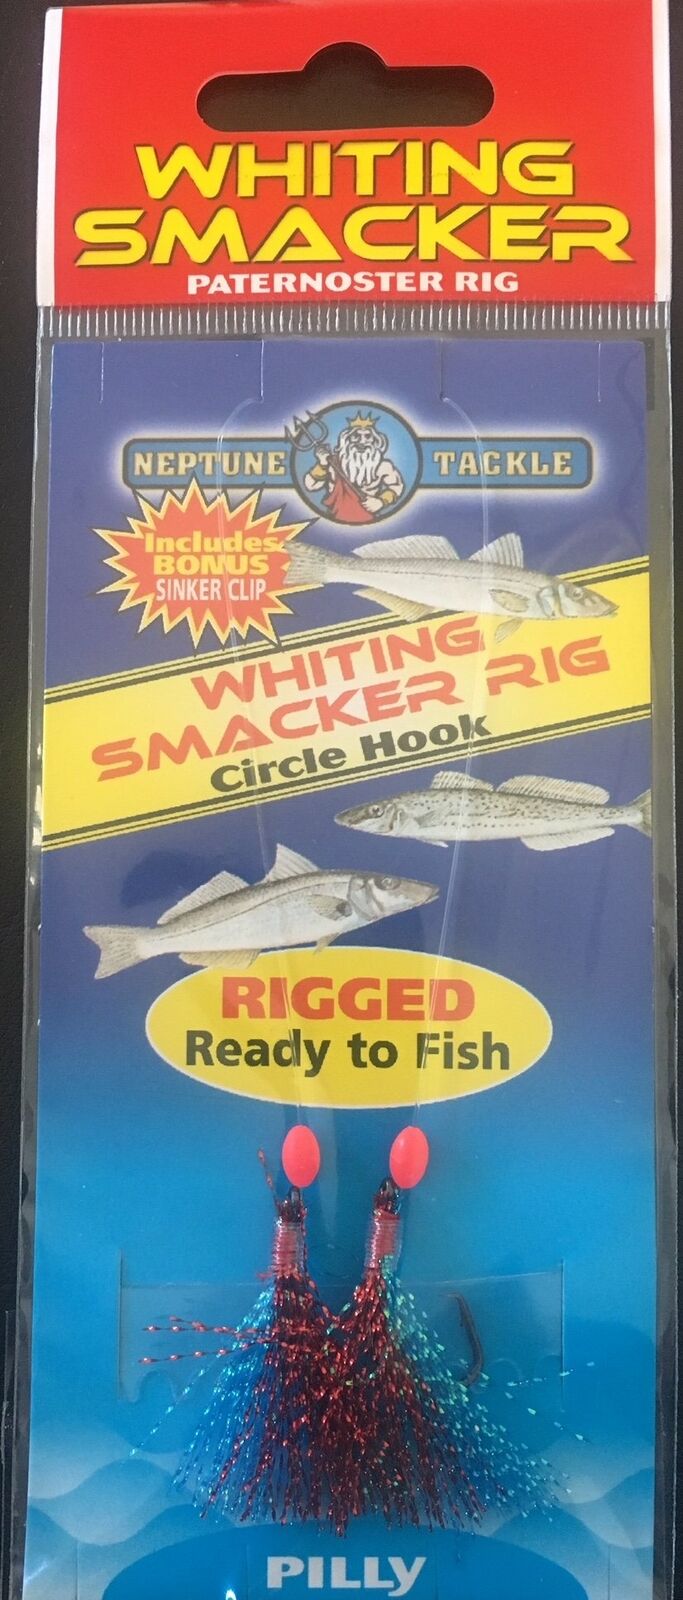 NEPTUNE WHITING SMACKER PATERNOSTER RIG - REEL 'N' DEAL TACKLE